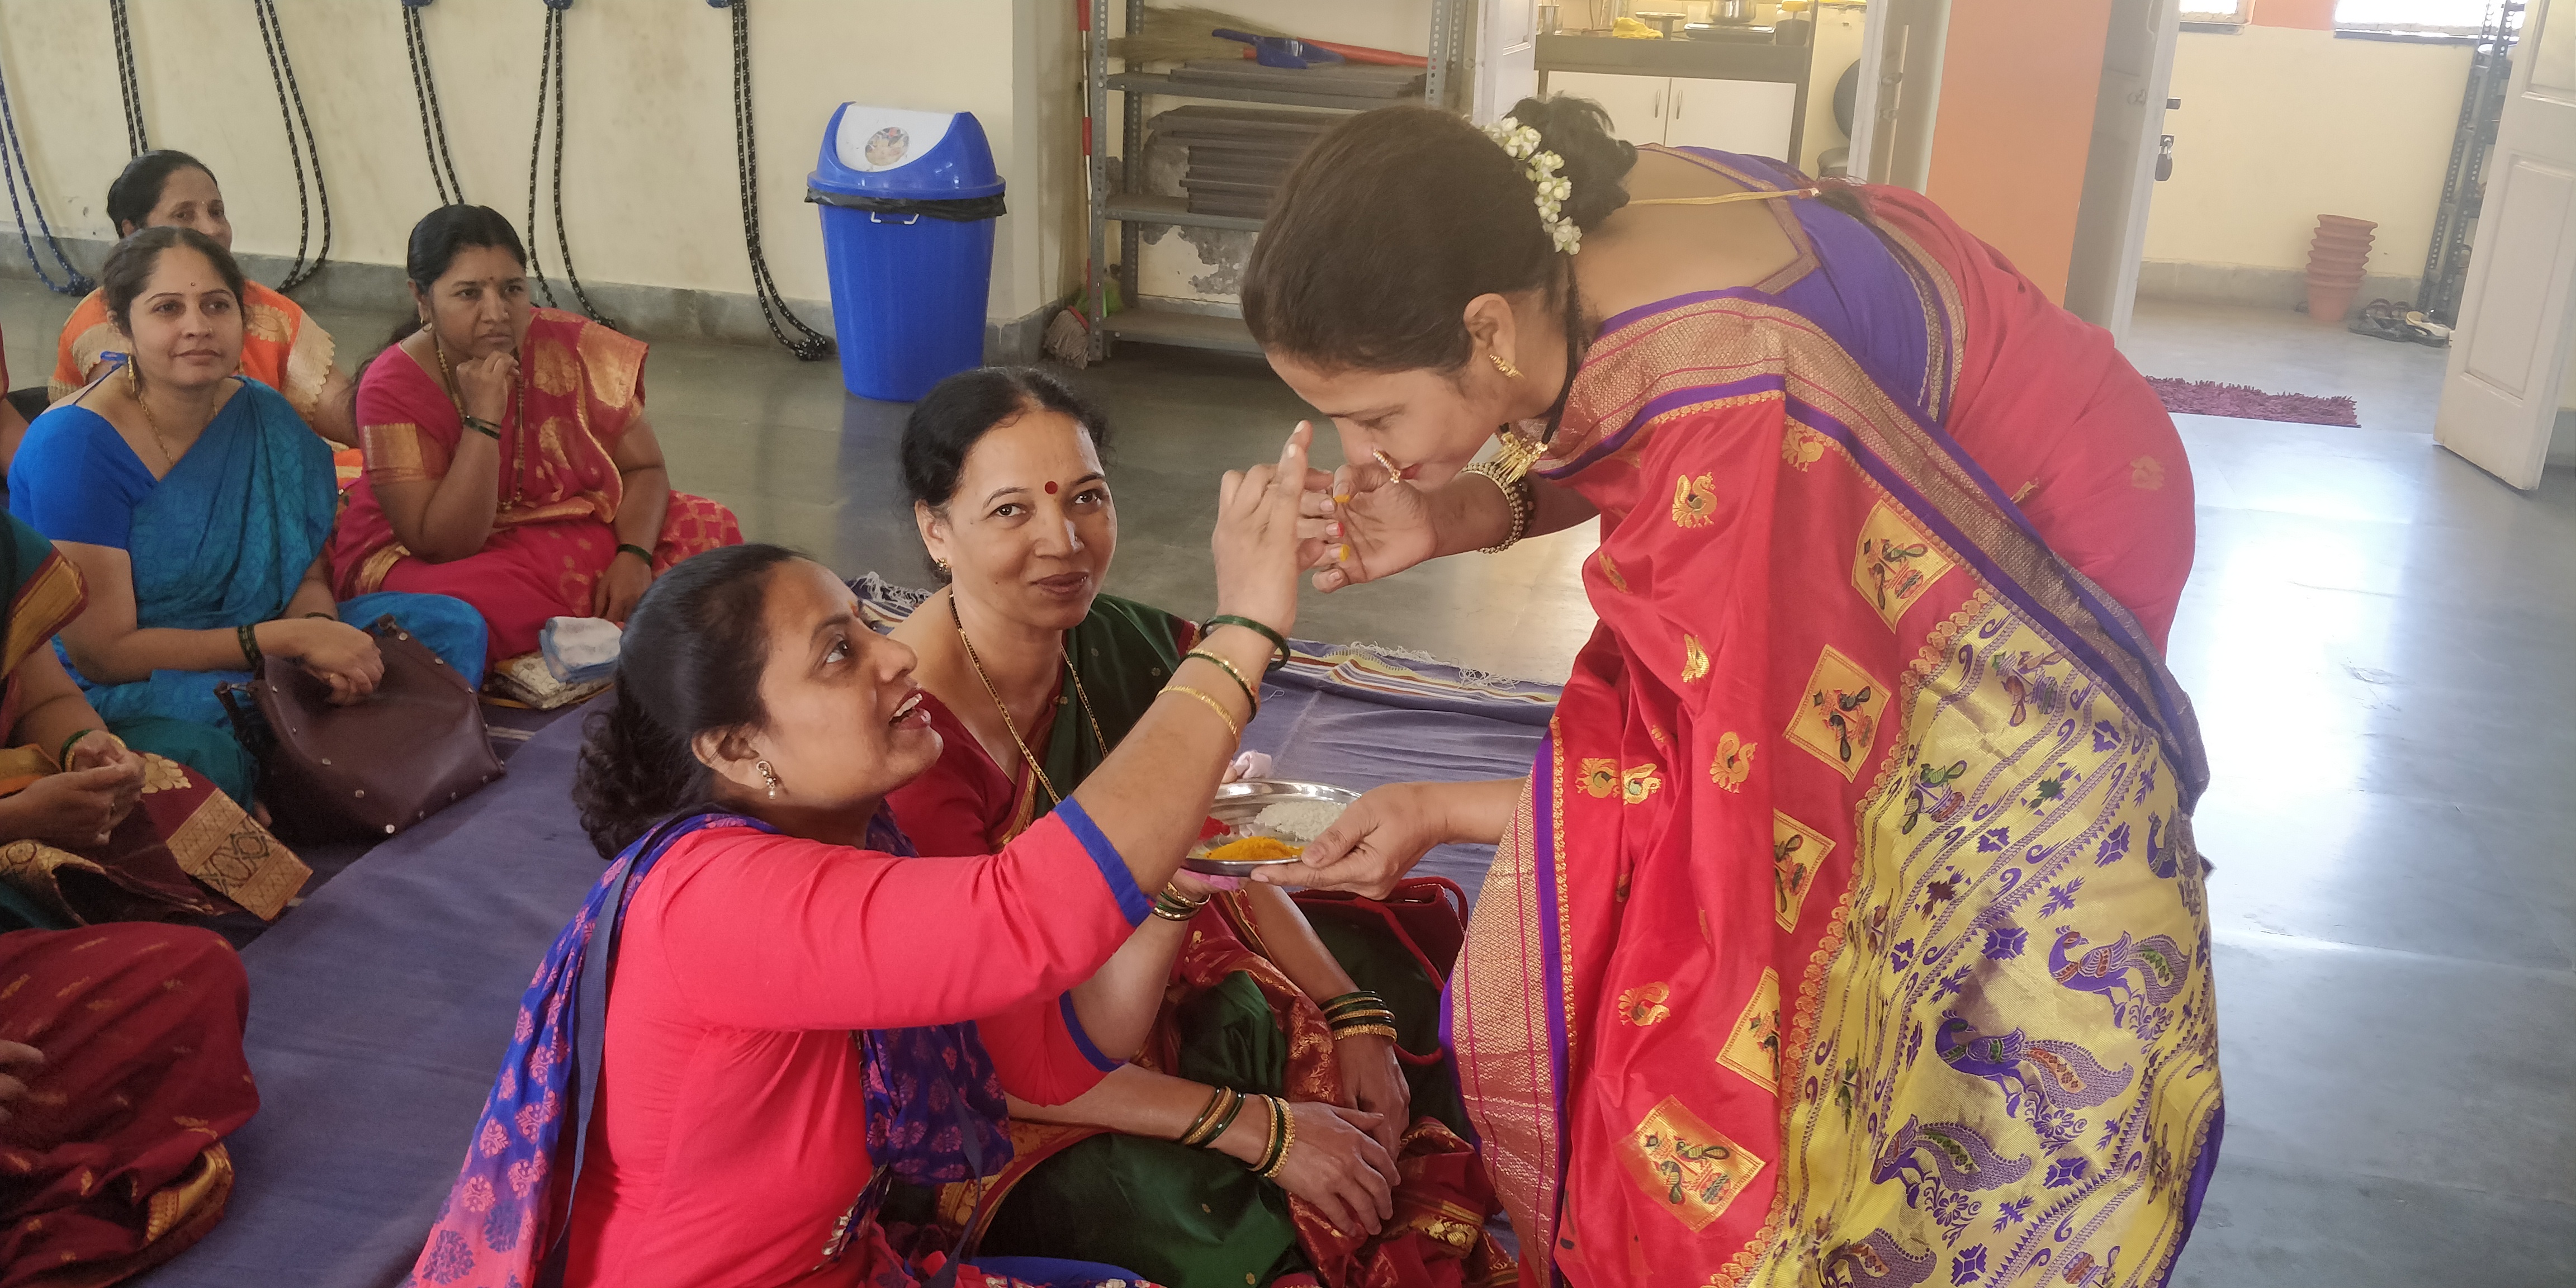 A beneficiary applying 'haldi' and 'kumkum' to the Project Director. A ritual where women bless each other and acknowledge a happy and prosperous married life for each other
